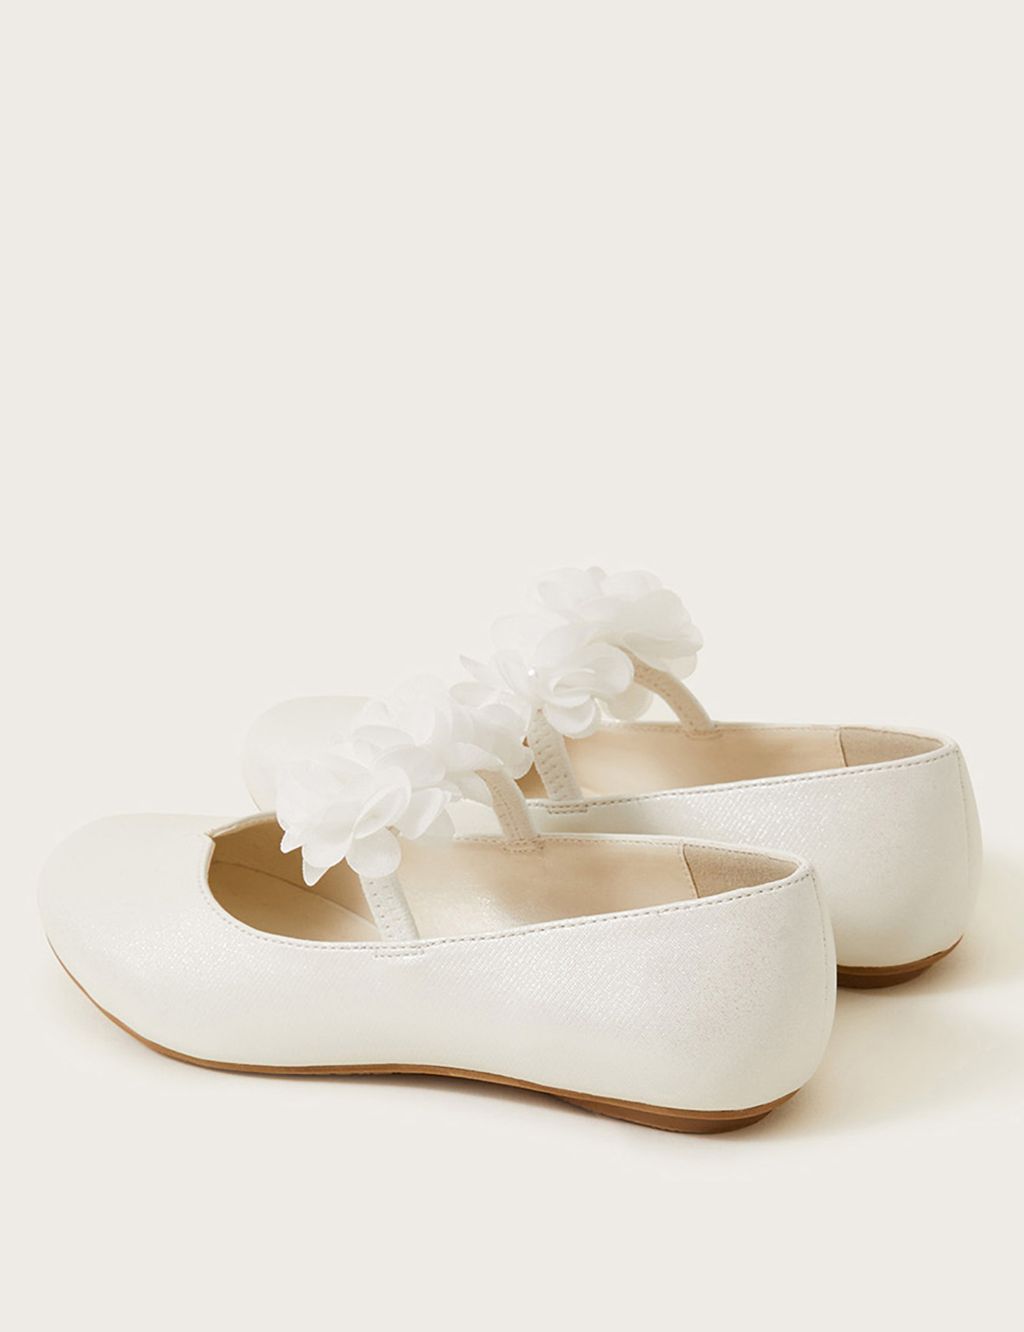 Kids' Floral Ballerina Party Shoes image 3